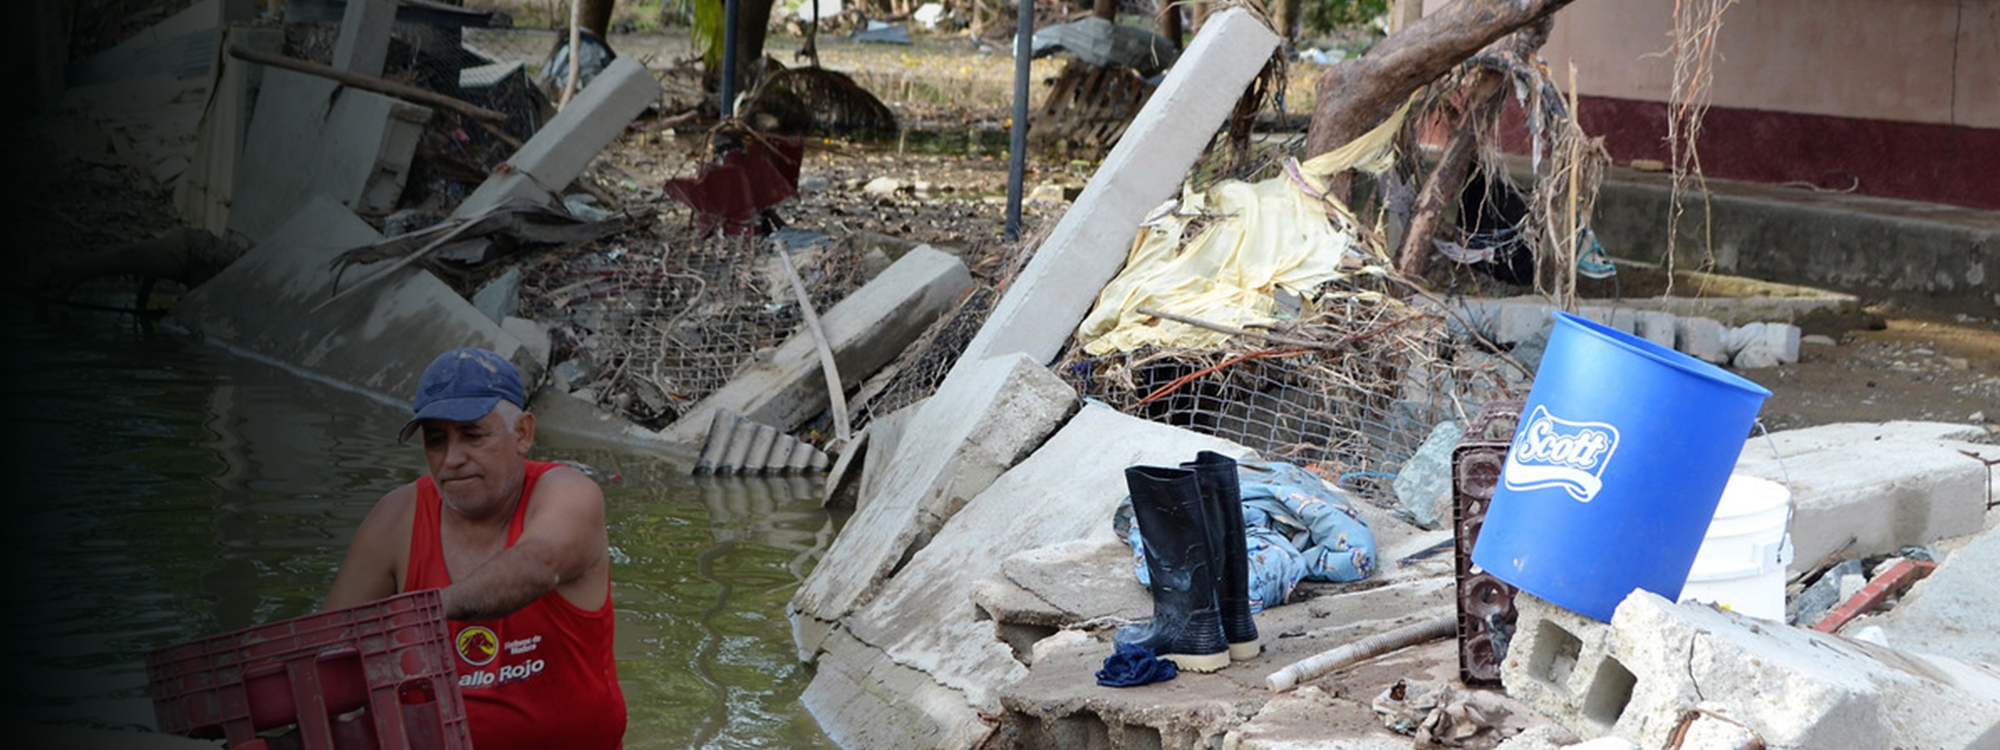 Man trying to salvage possessions from flood waters in Honduras